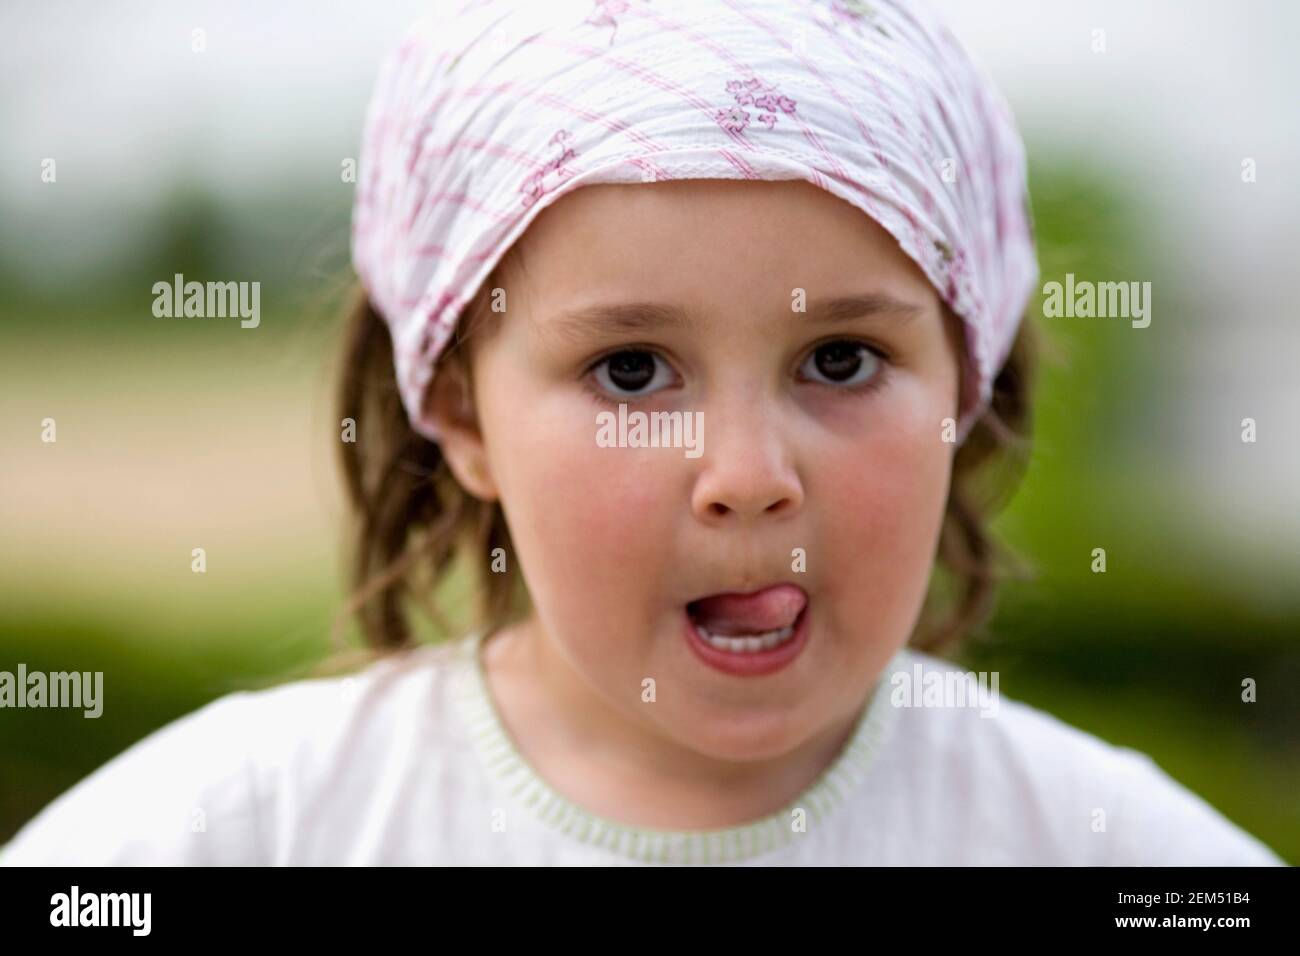 Portrait of a girl licking her lips Stock Photo